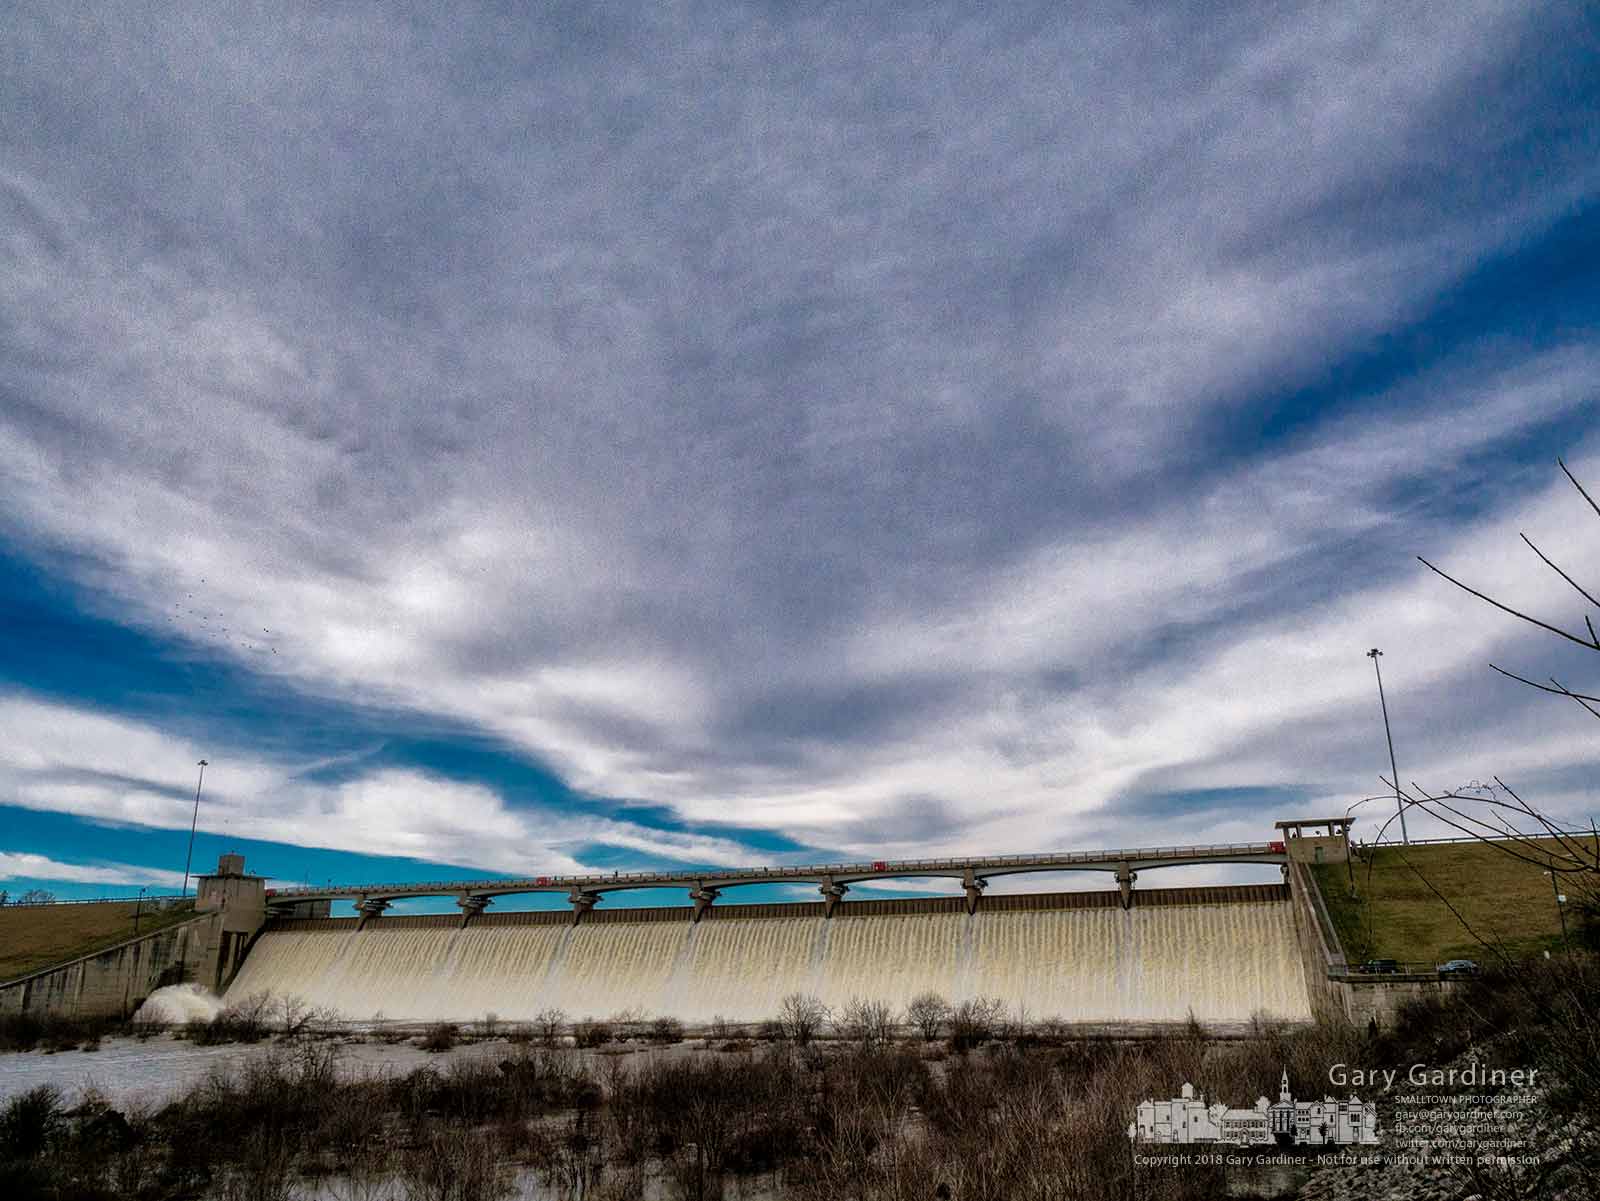 Winter clouds move across the sky over Hoover Dam where heavy rains have raised the water level high than normal for this time of the year. My Final Photo for Feb. 25, 2018.